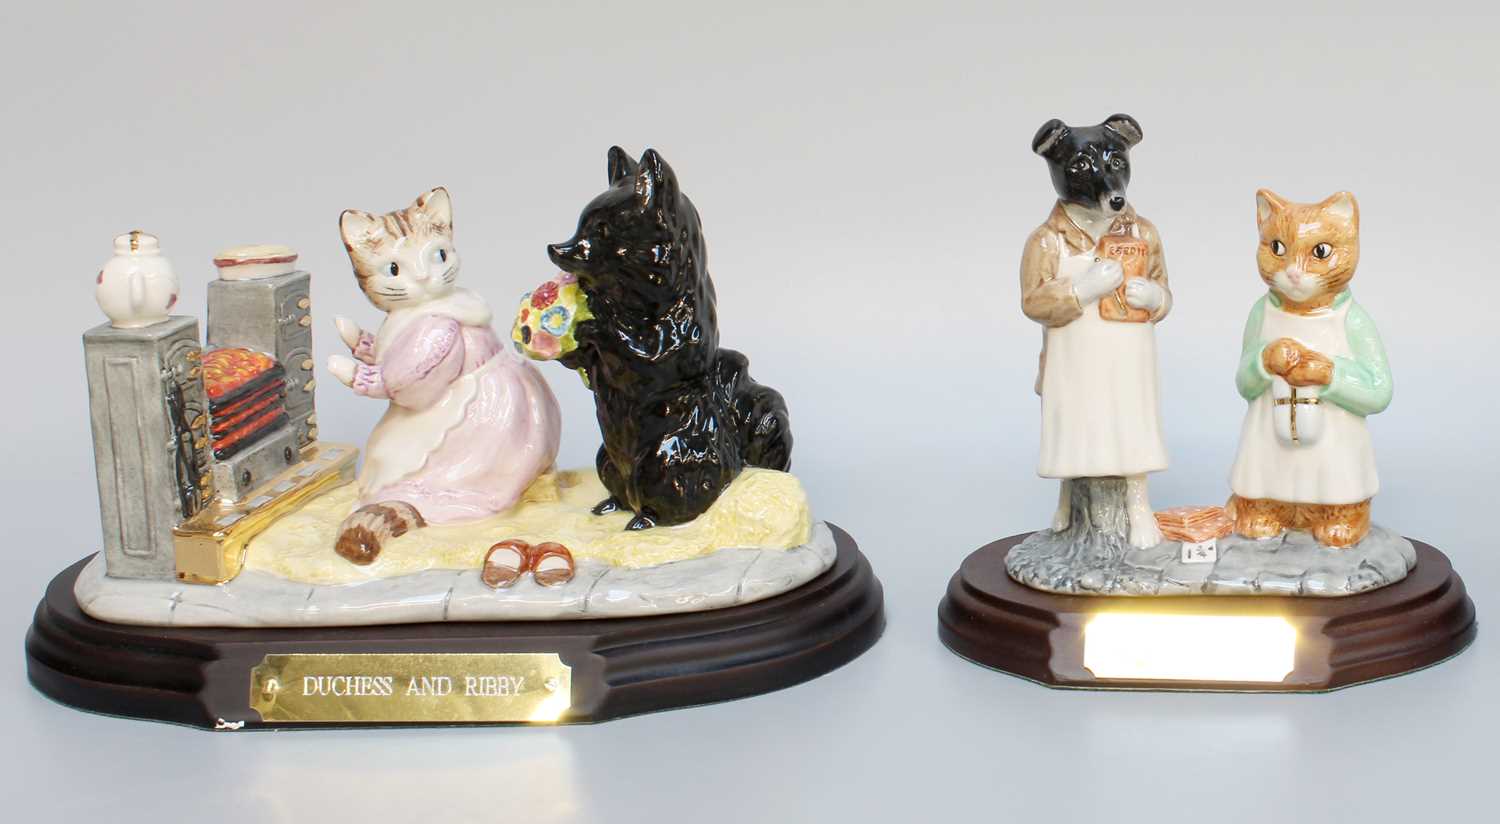 Beswick Beatrix Potter Tableaus: 'Duchess and Ribby', model No. P4983, Millennium limited edition